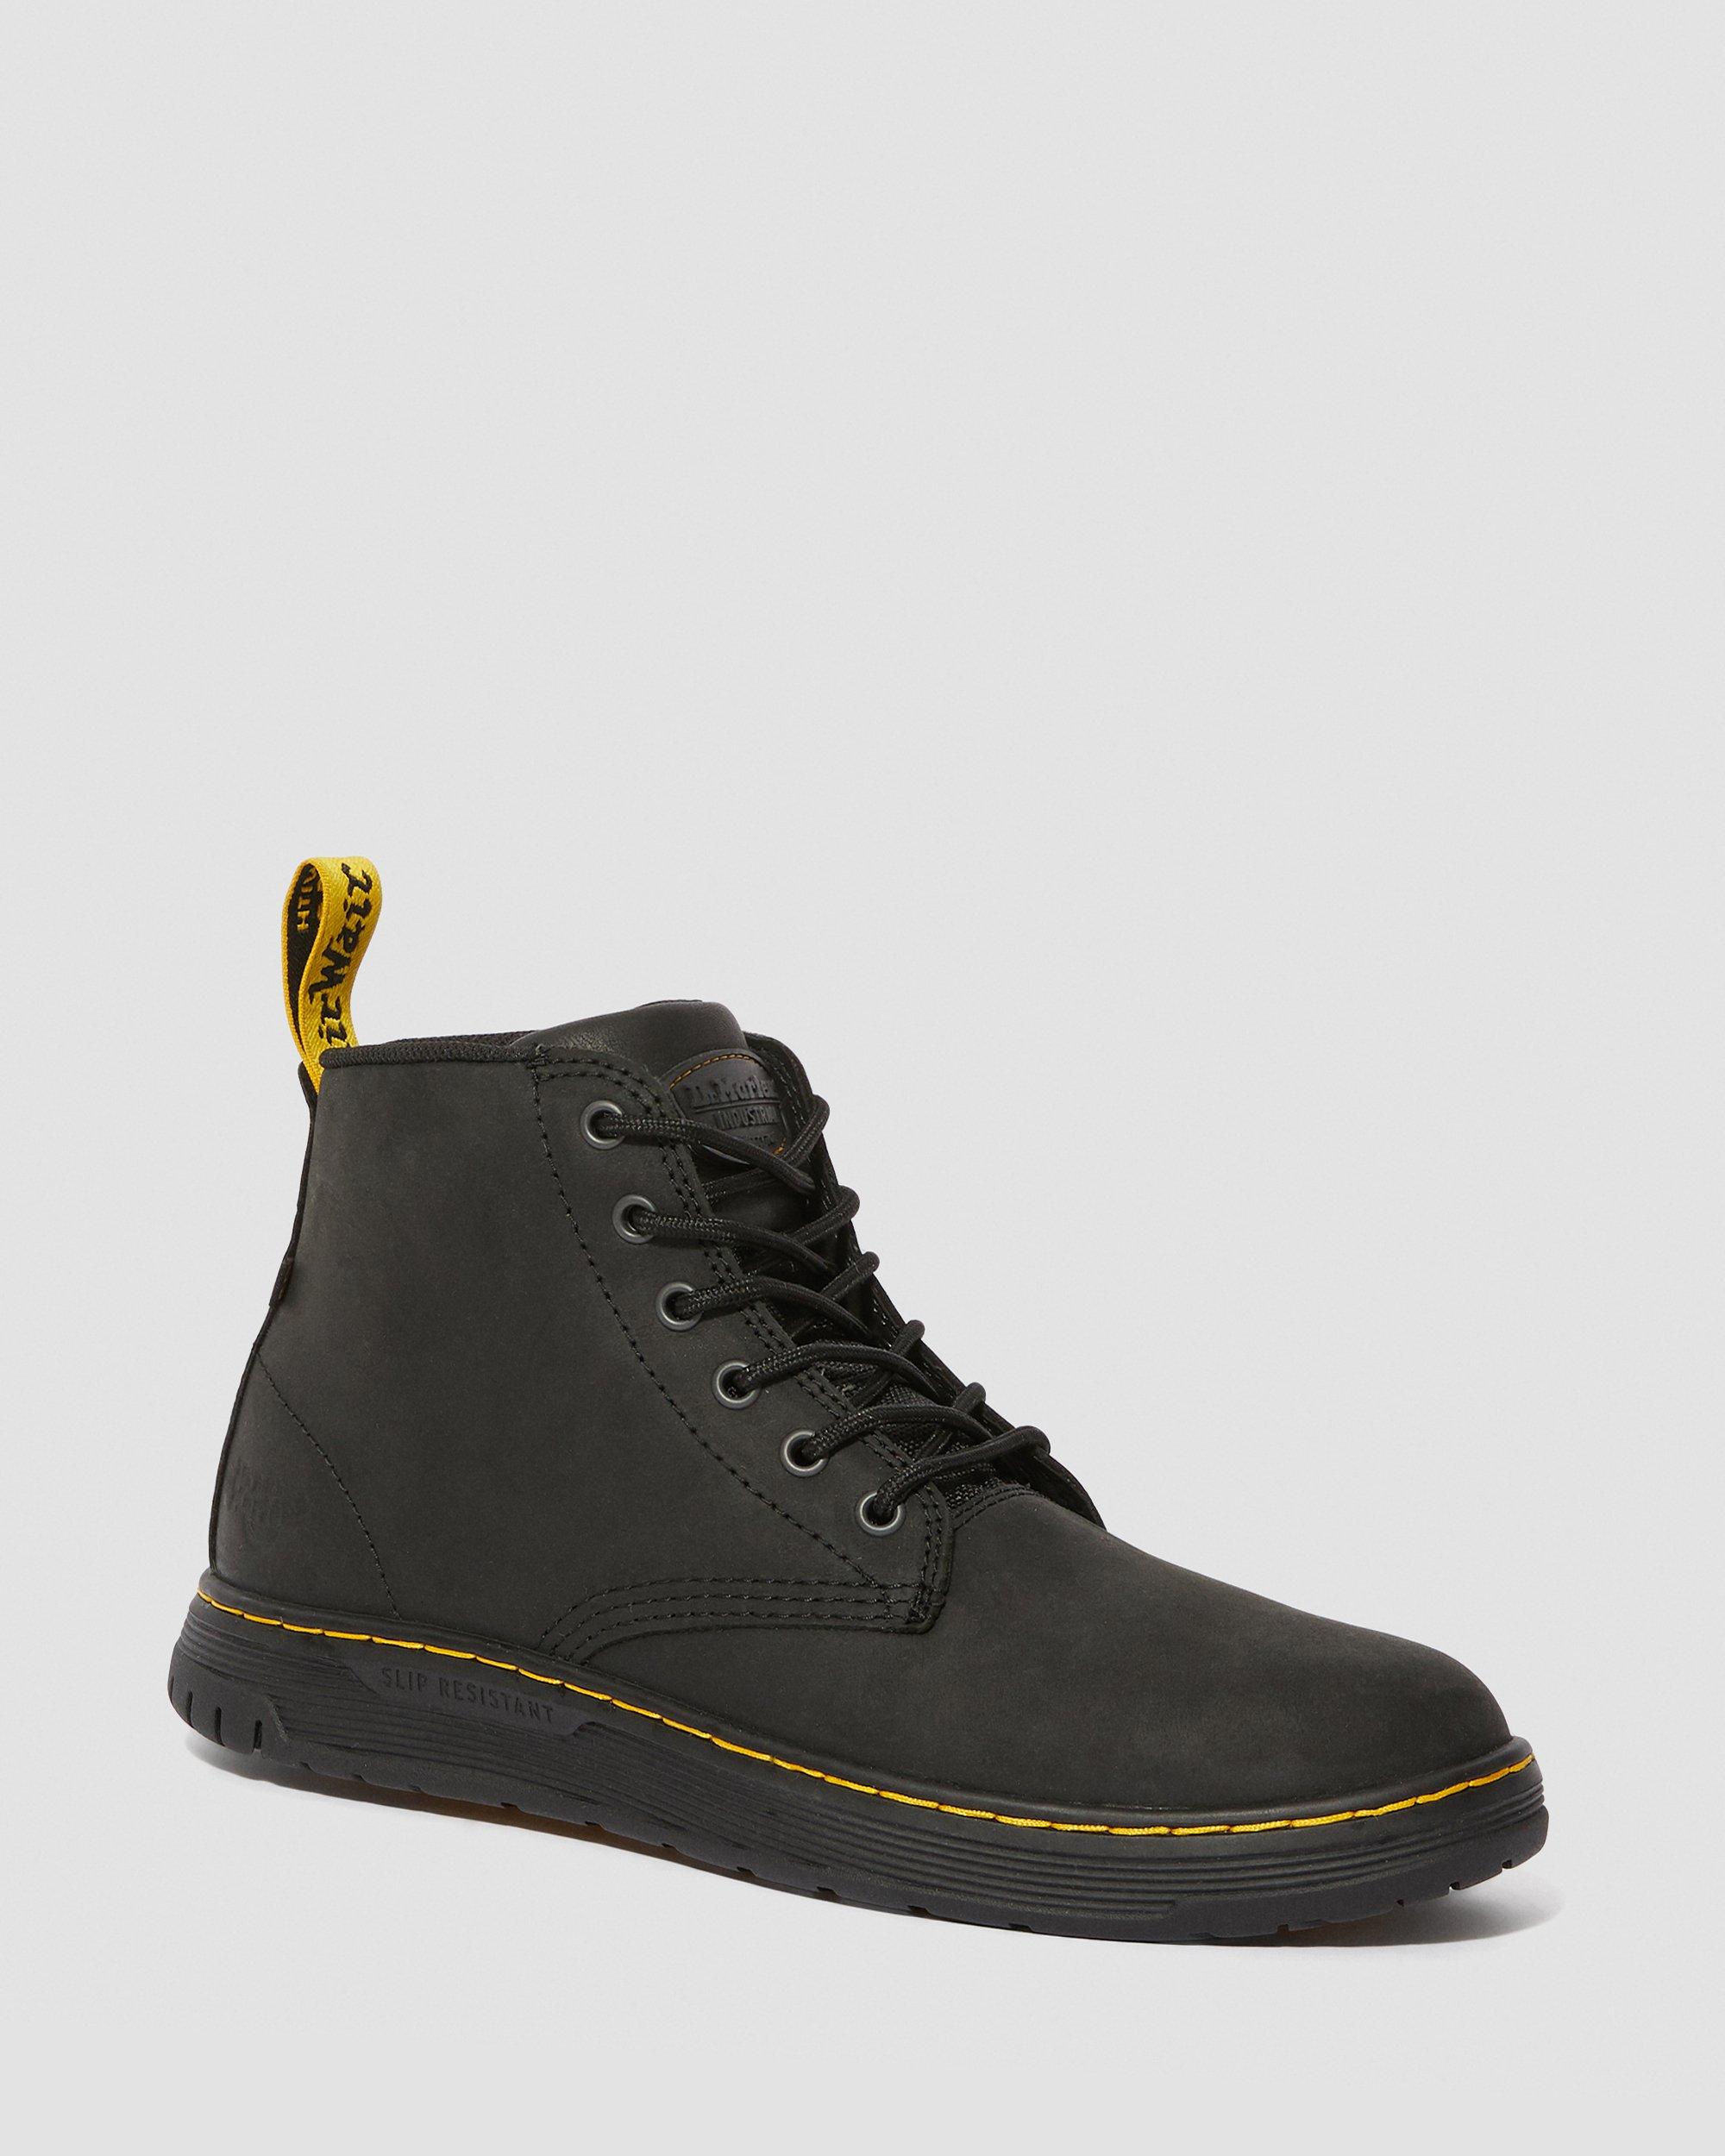 leather slip resistant work boots